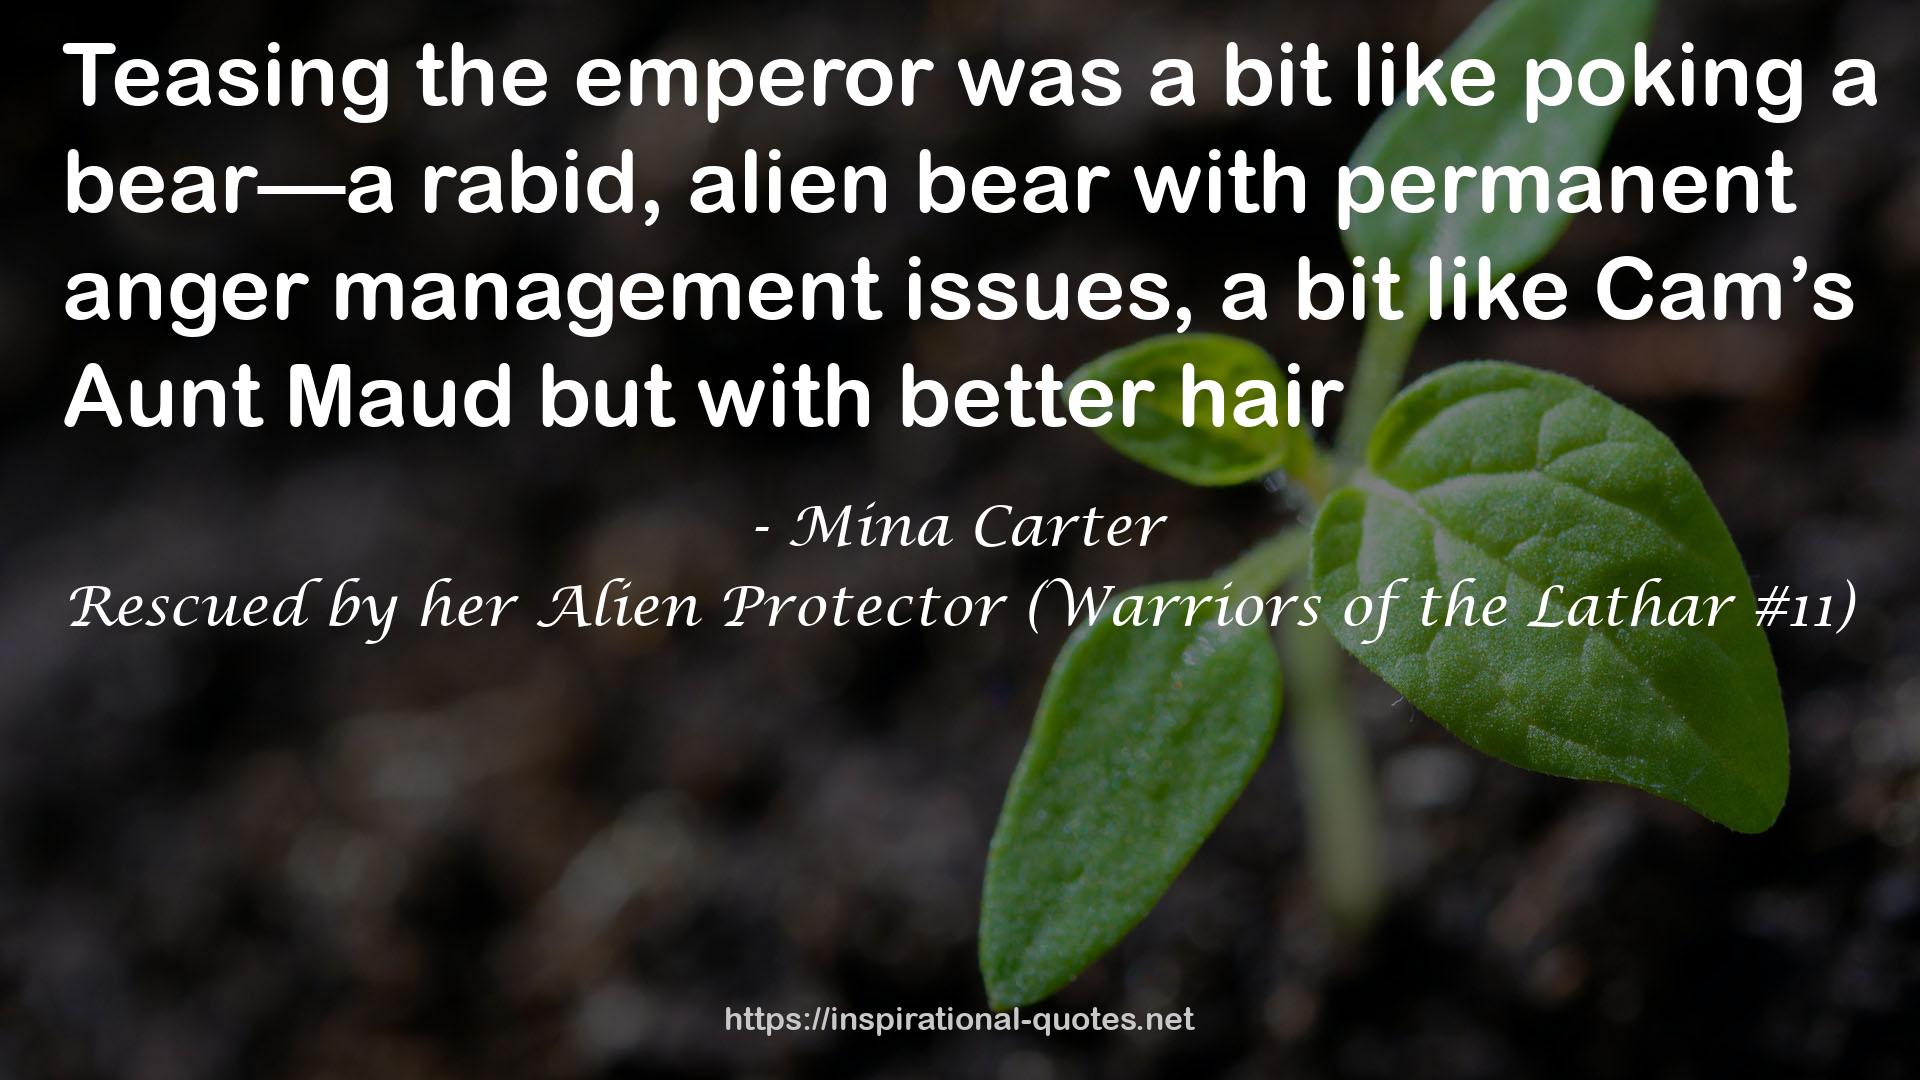 Rescued by her Alien Protector (Warriors of the Lathar #11) QUOTES